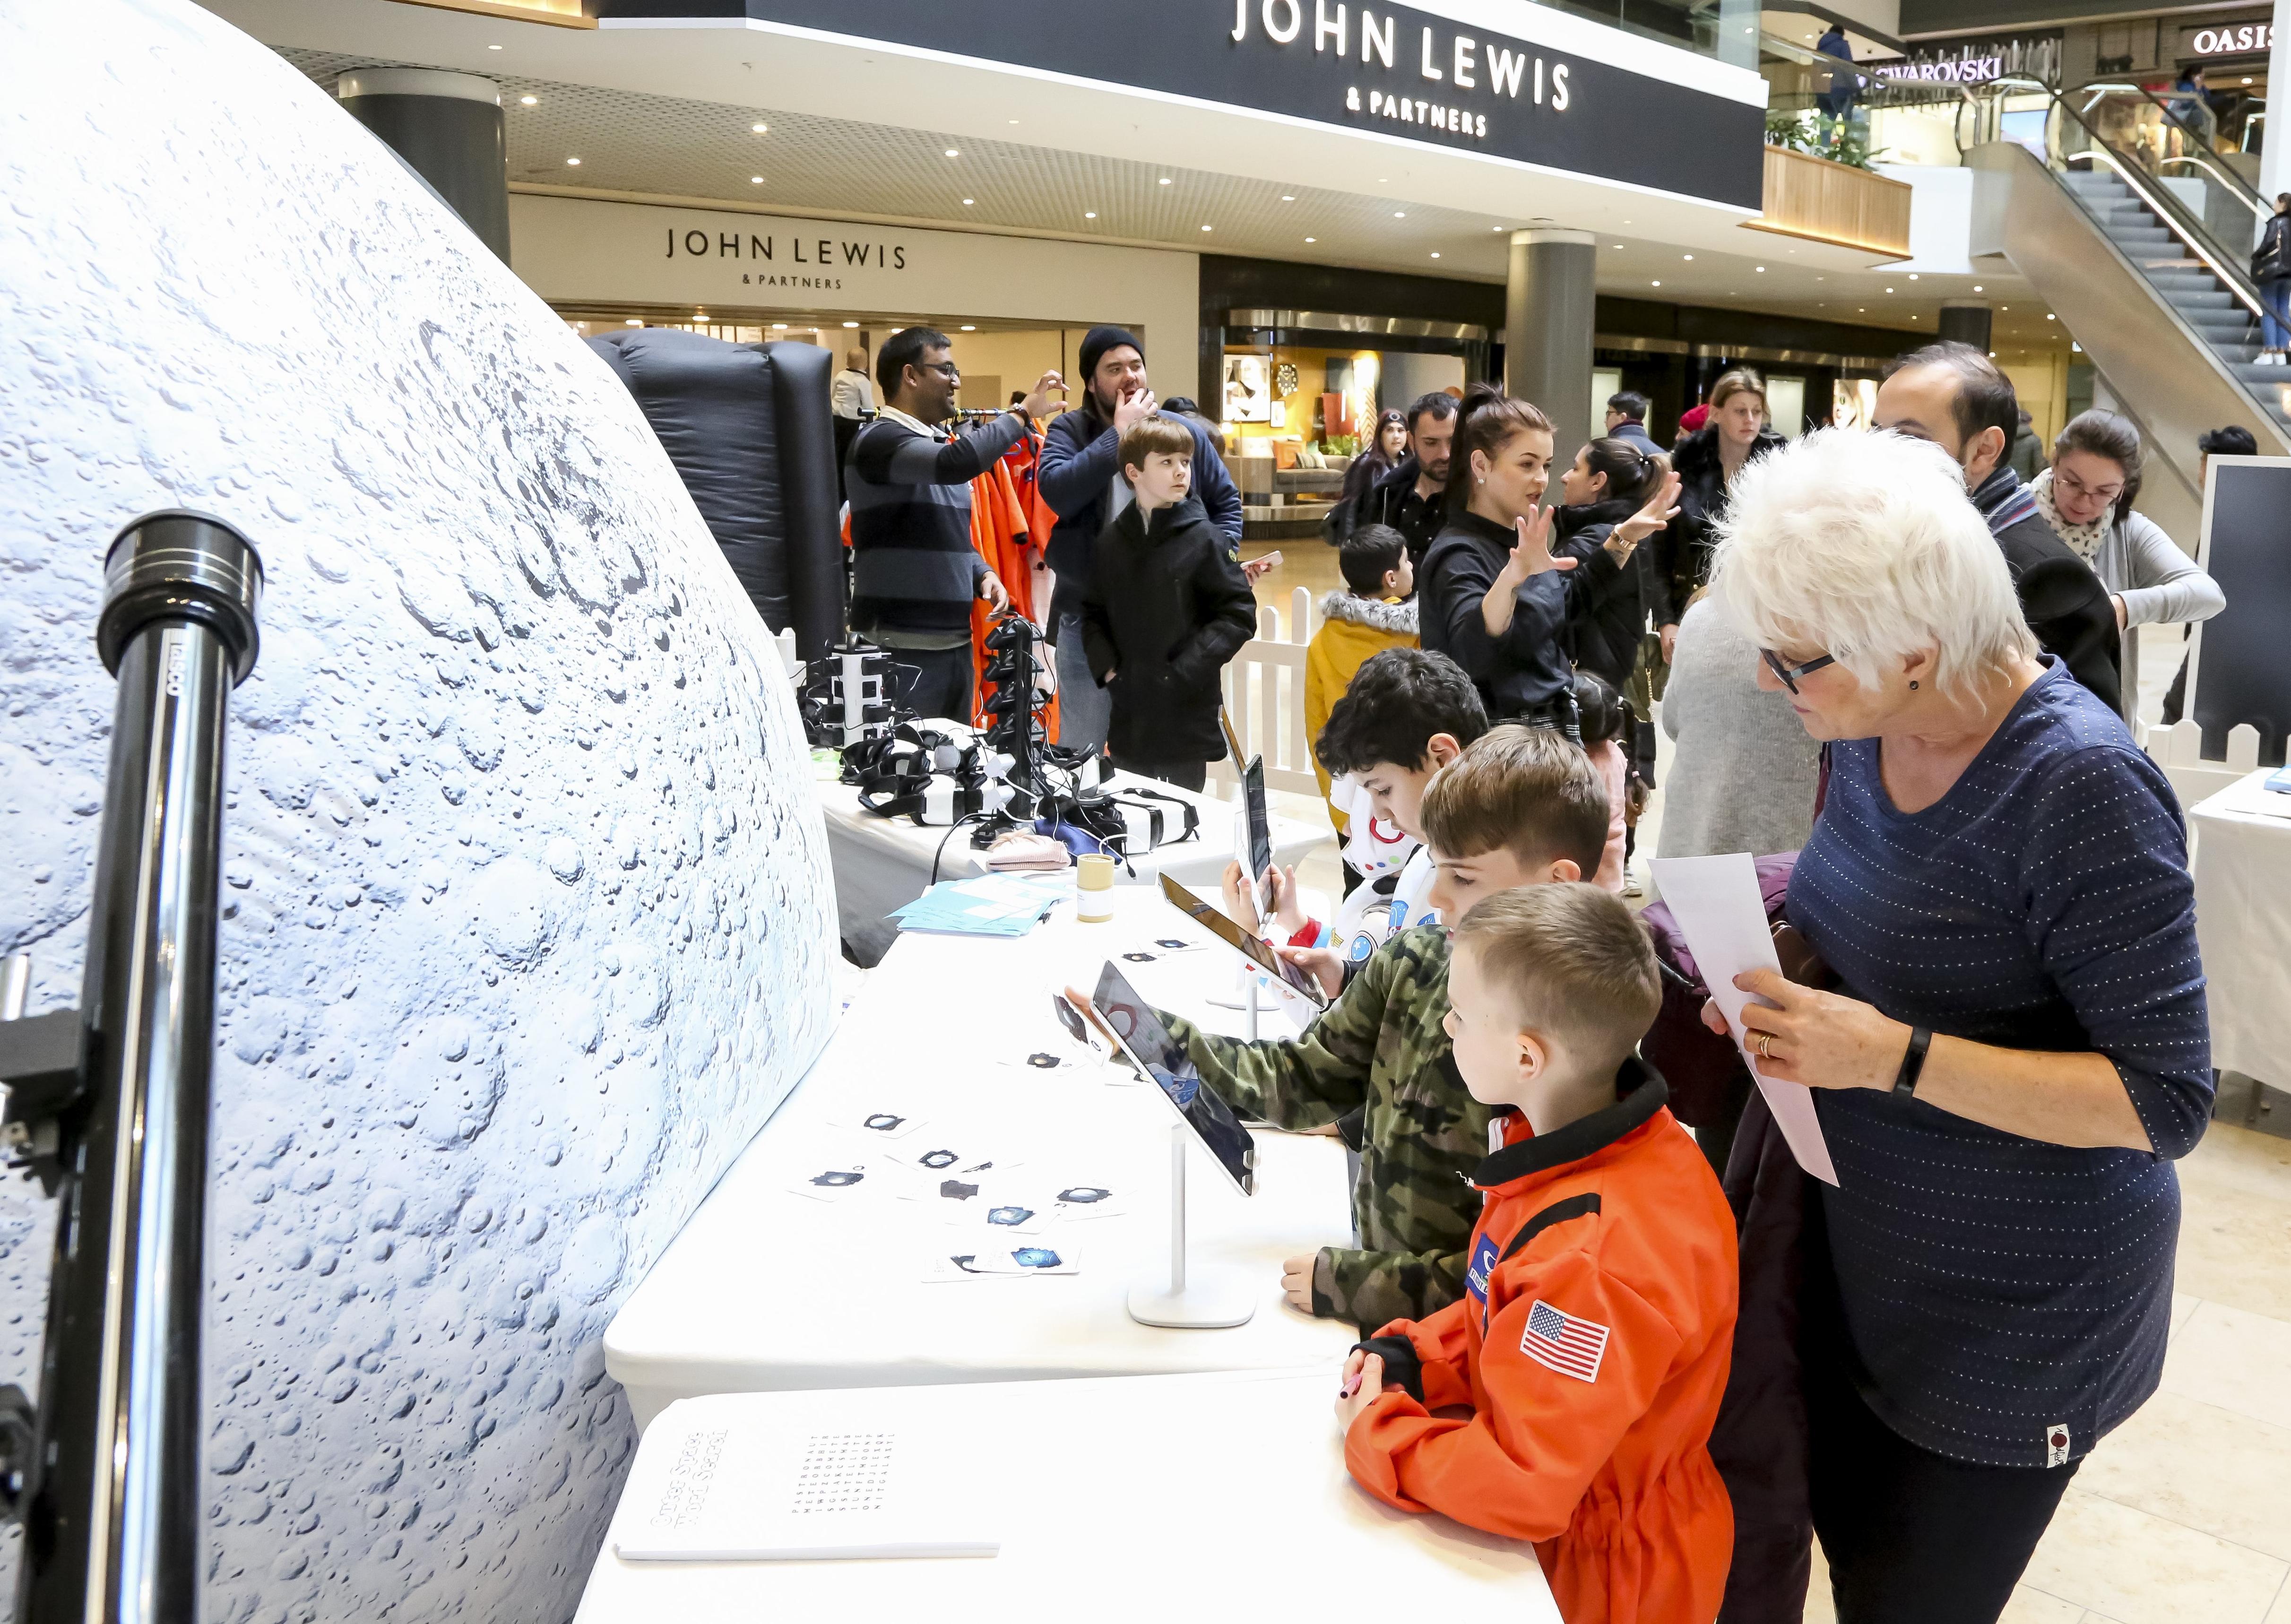 A World of Imagination space-themed event at Queensgate in Peterborough